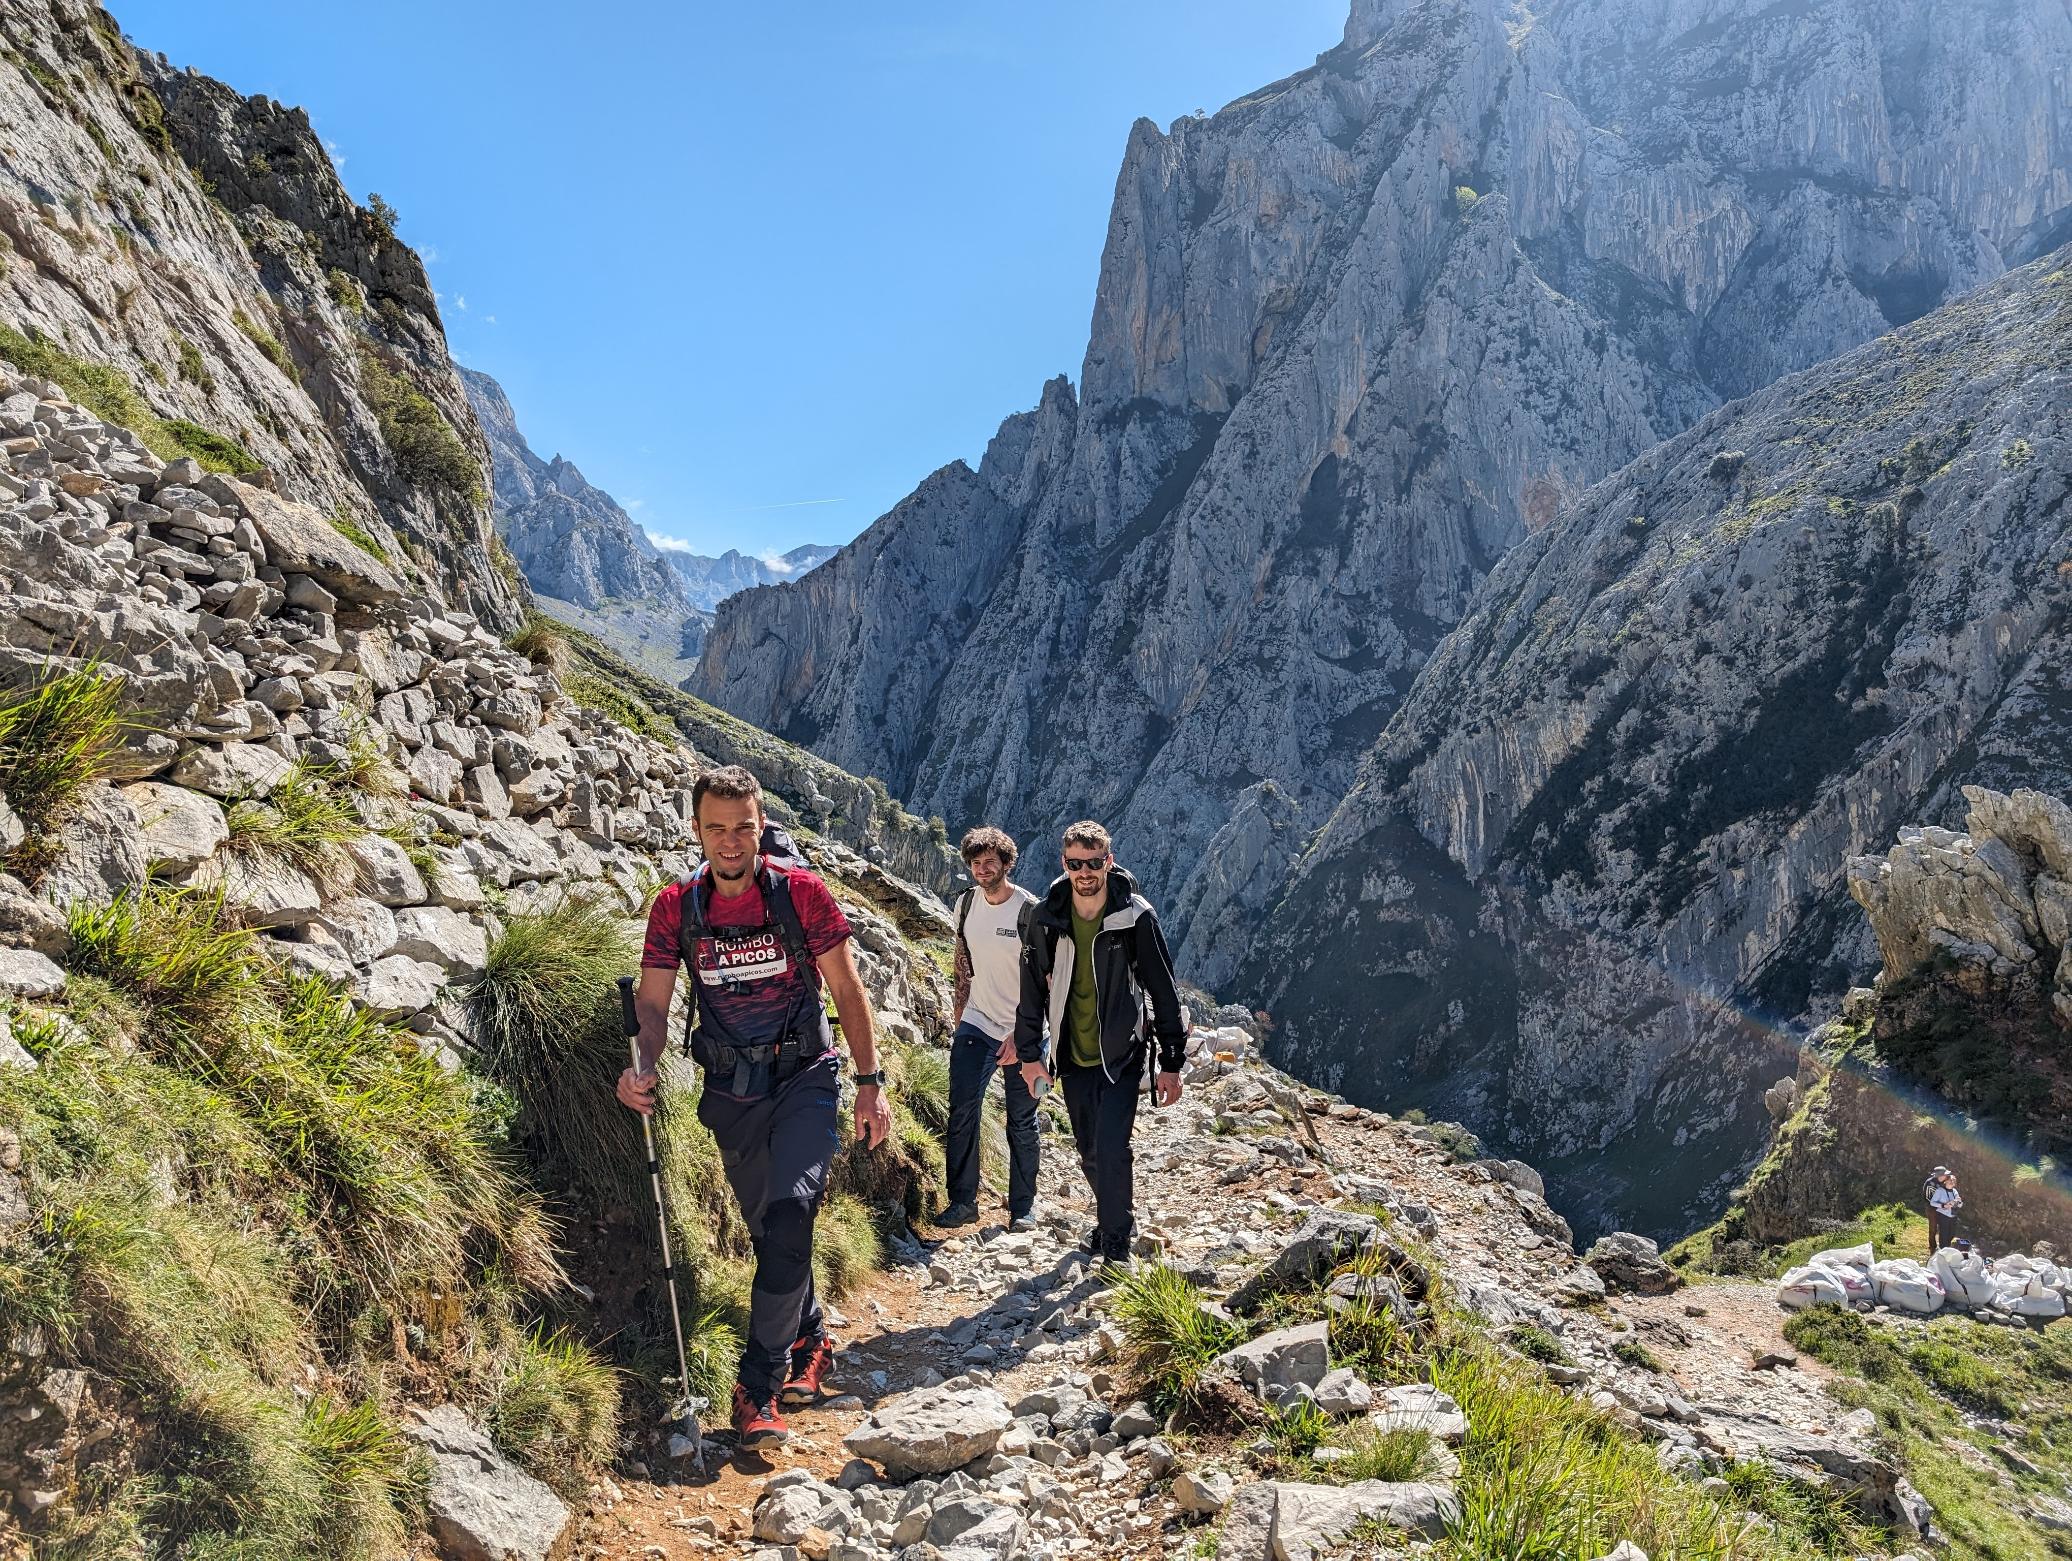 An early moment on the Ruta del Cares gorge walk, ascending from the start point. Photo: Stuart Kenny